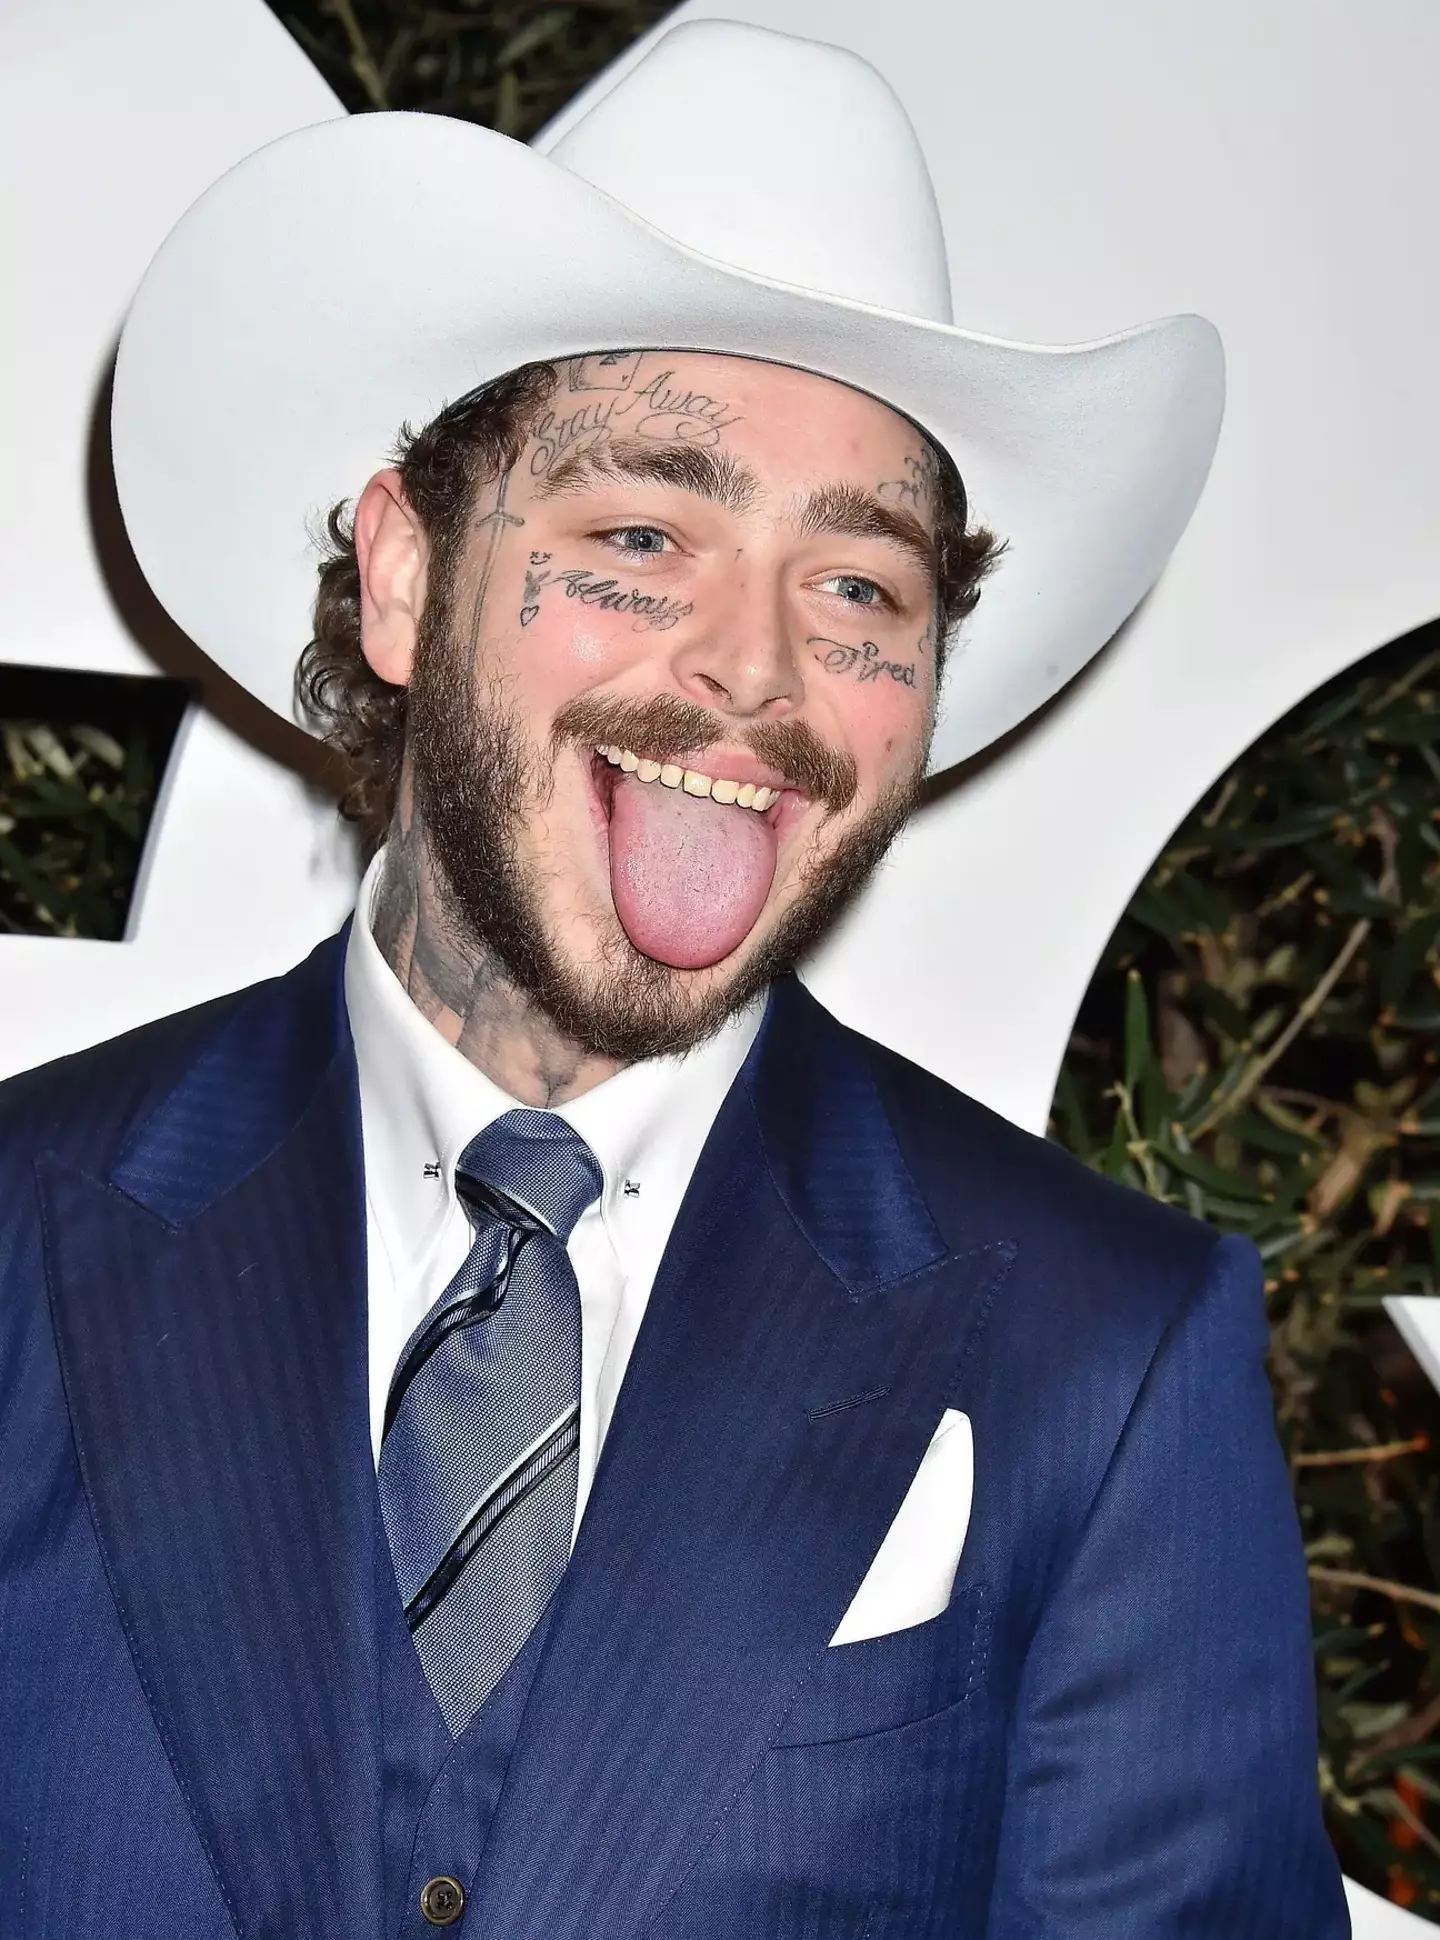 Post Malone is now a dad AND he's engaged!